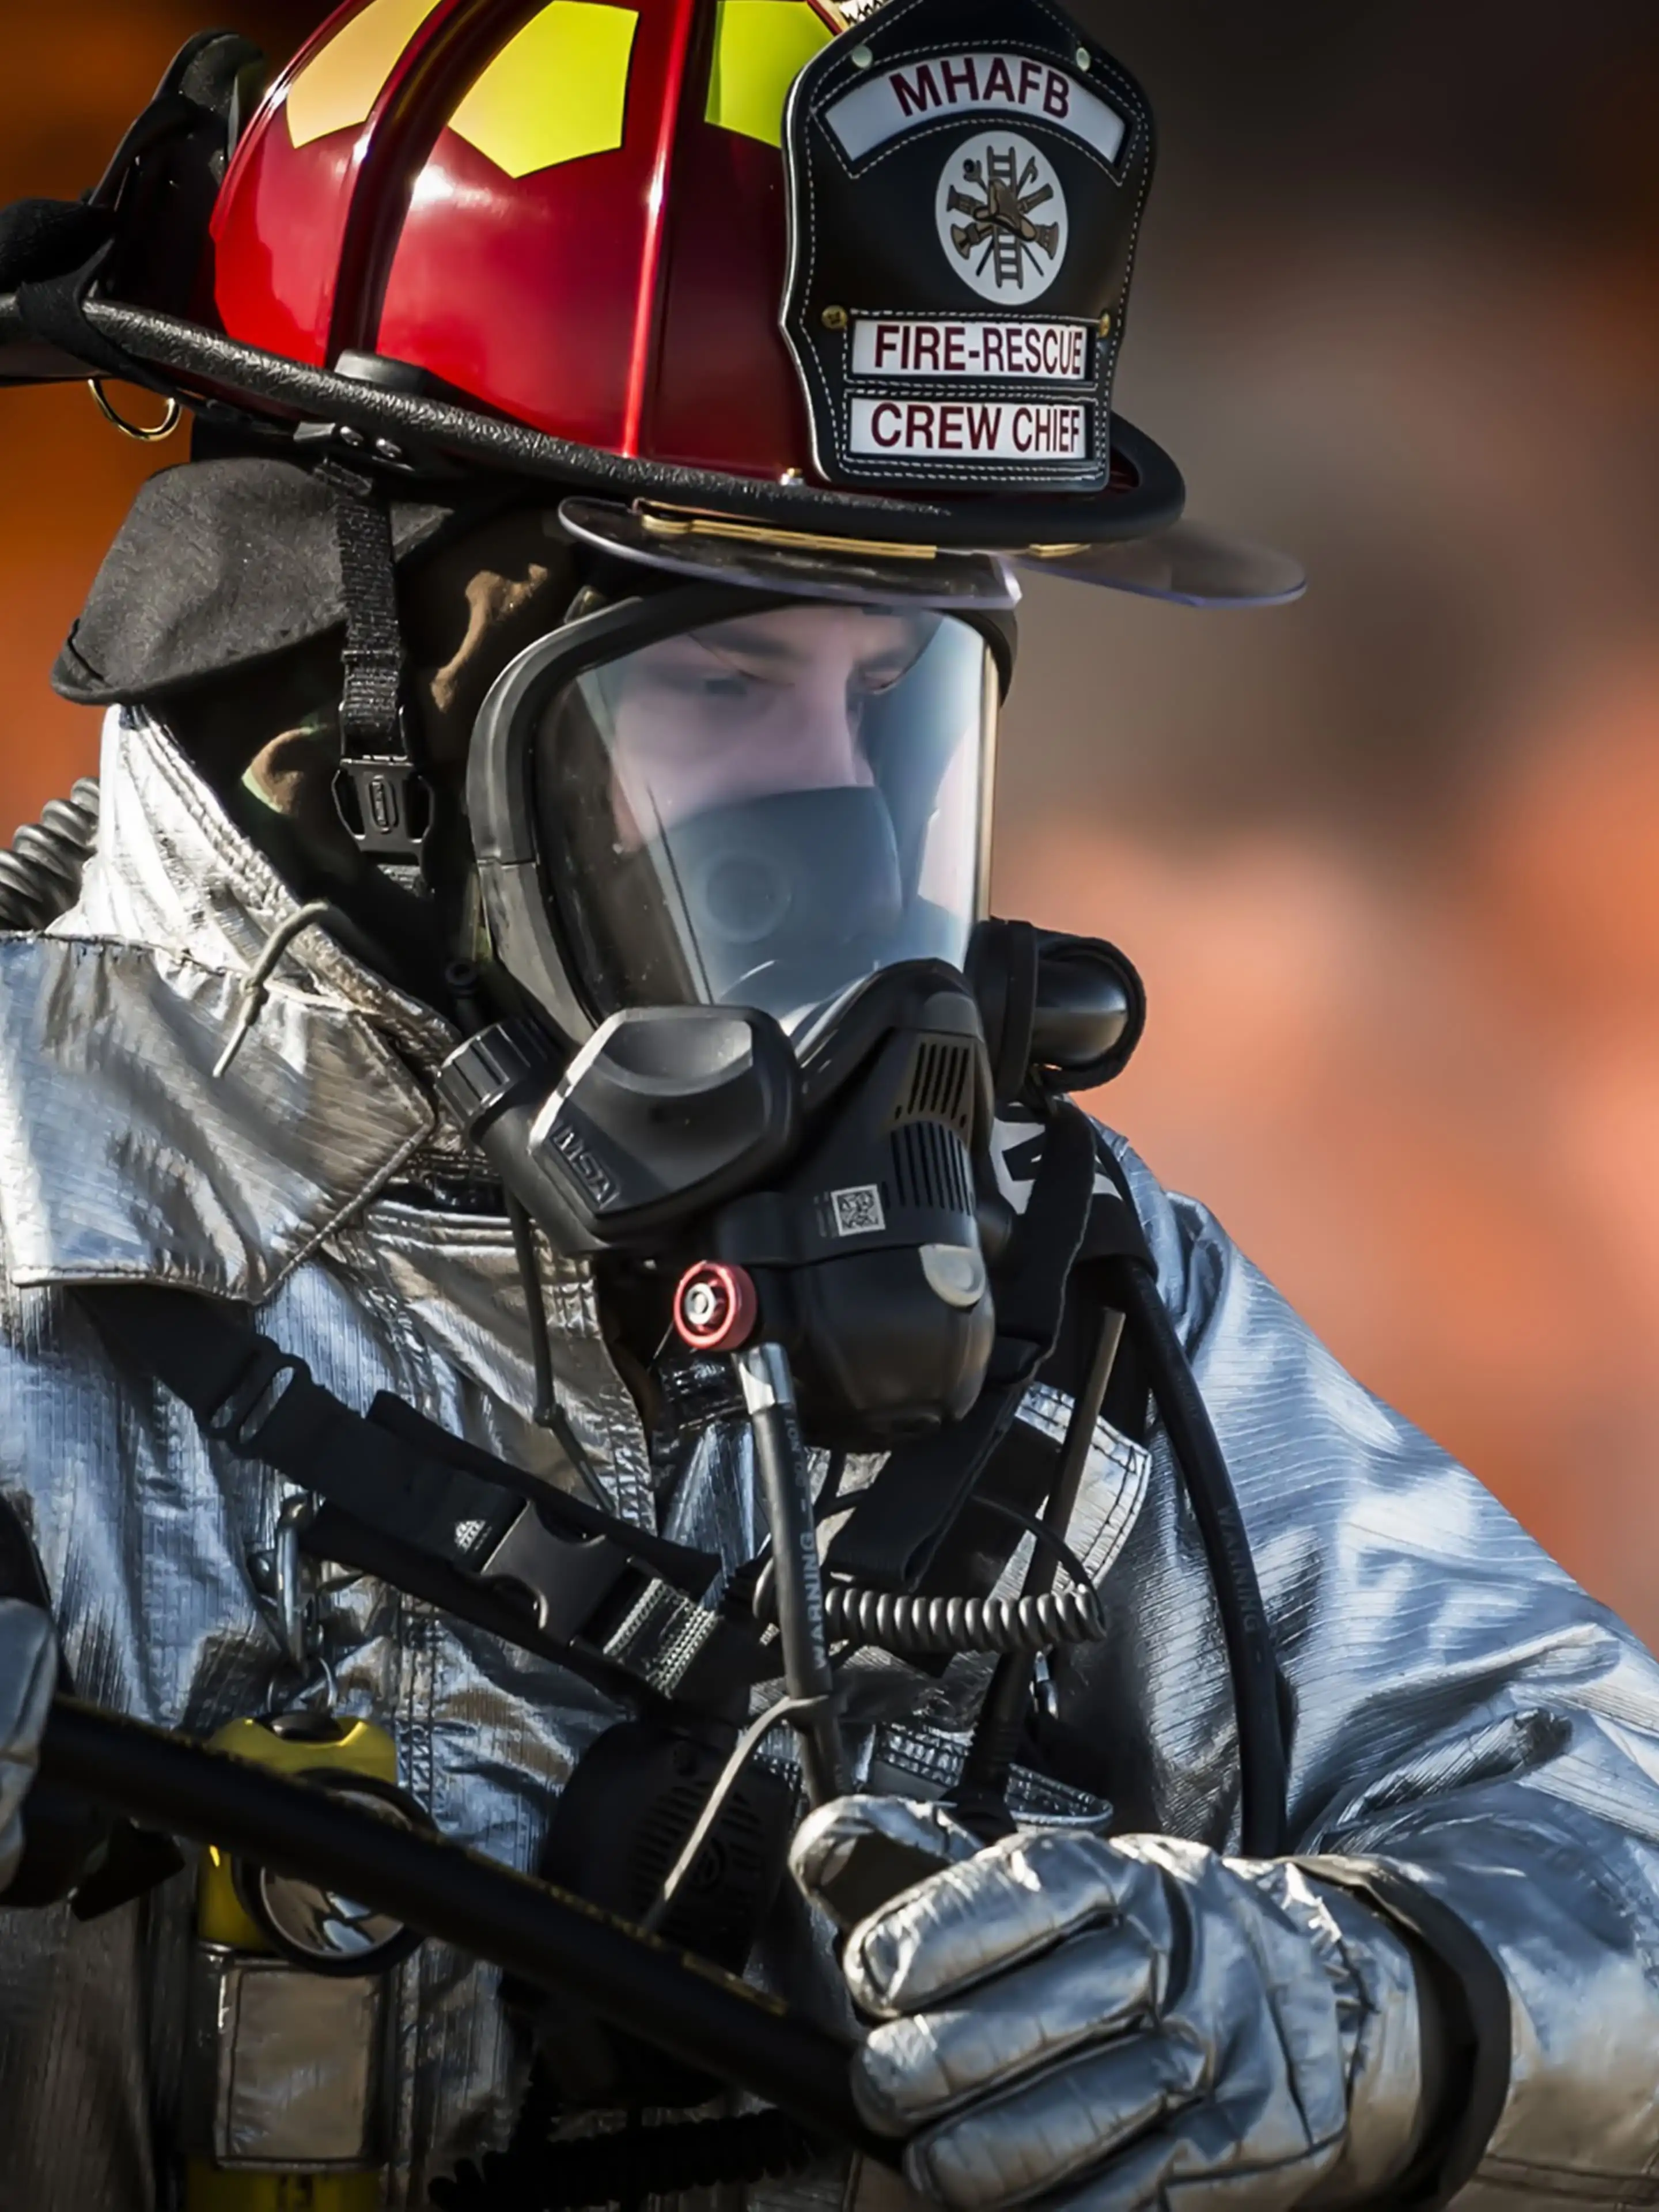 1481 Firefighter Wallpaper Stock Photos HighRes Pictures and Images   Getty Images